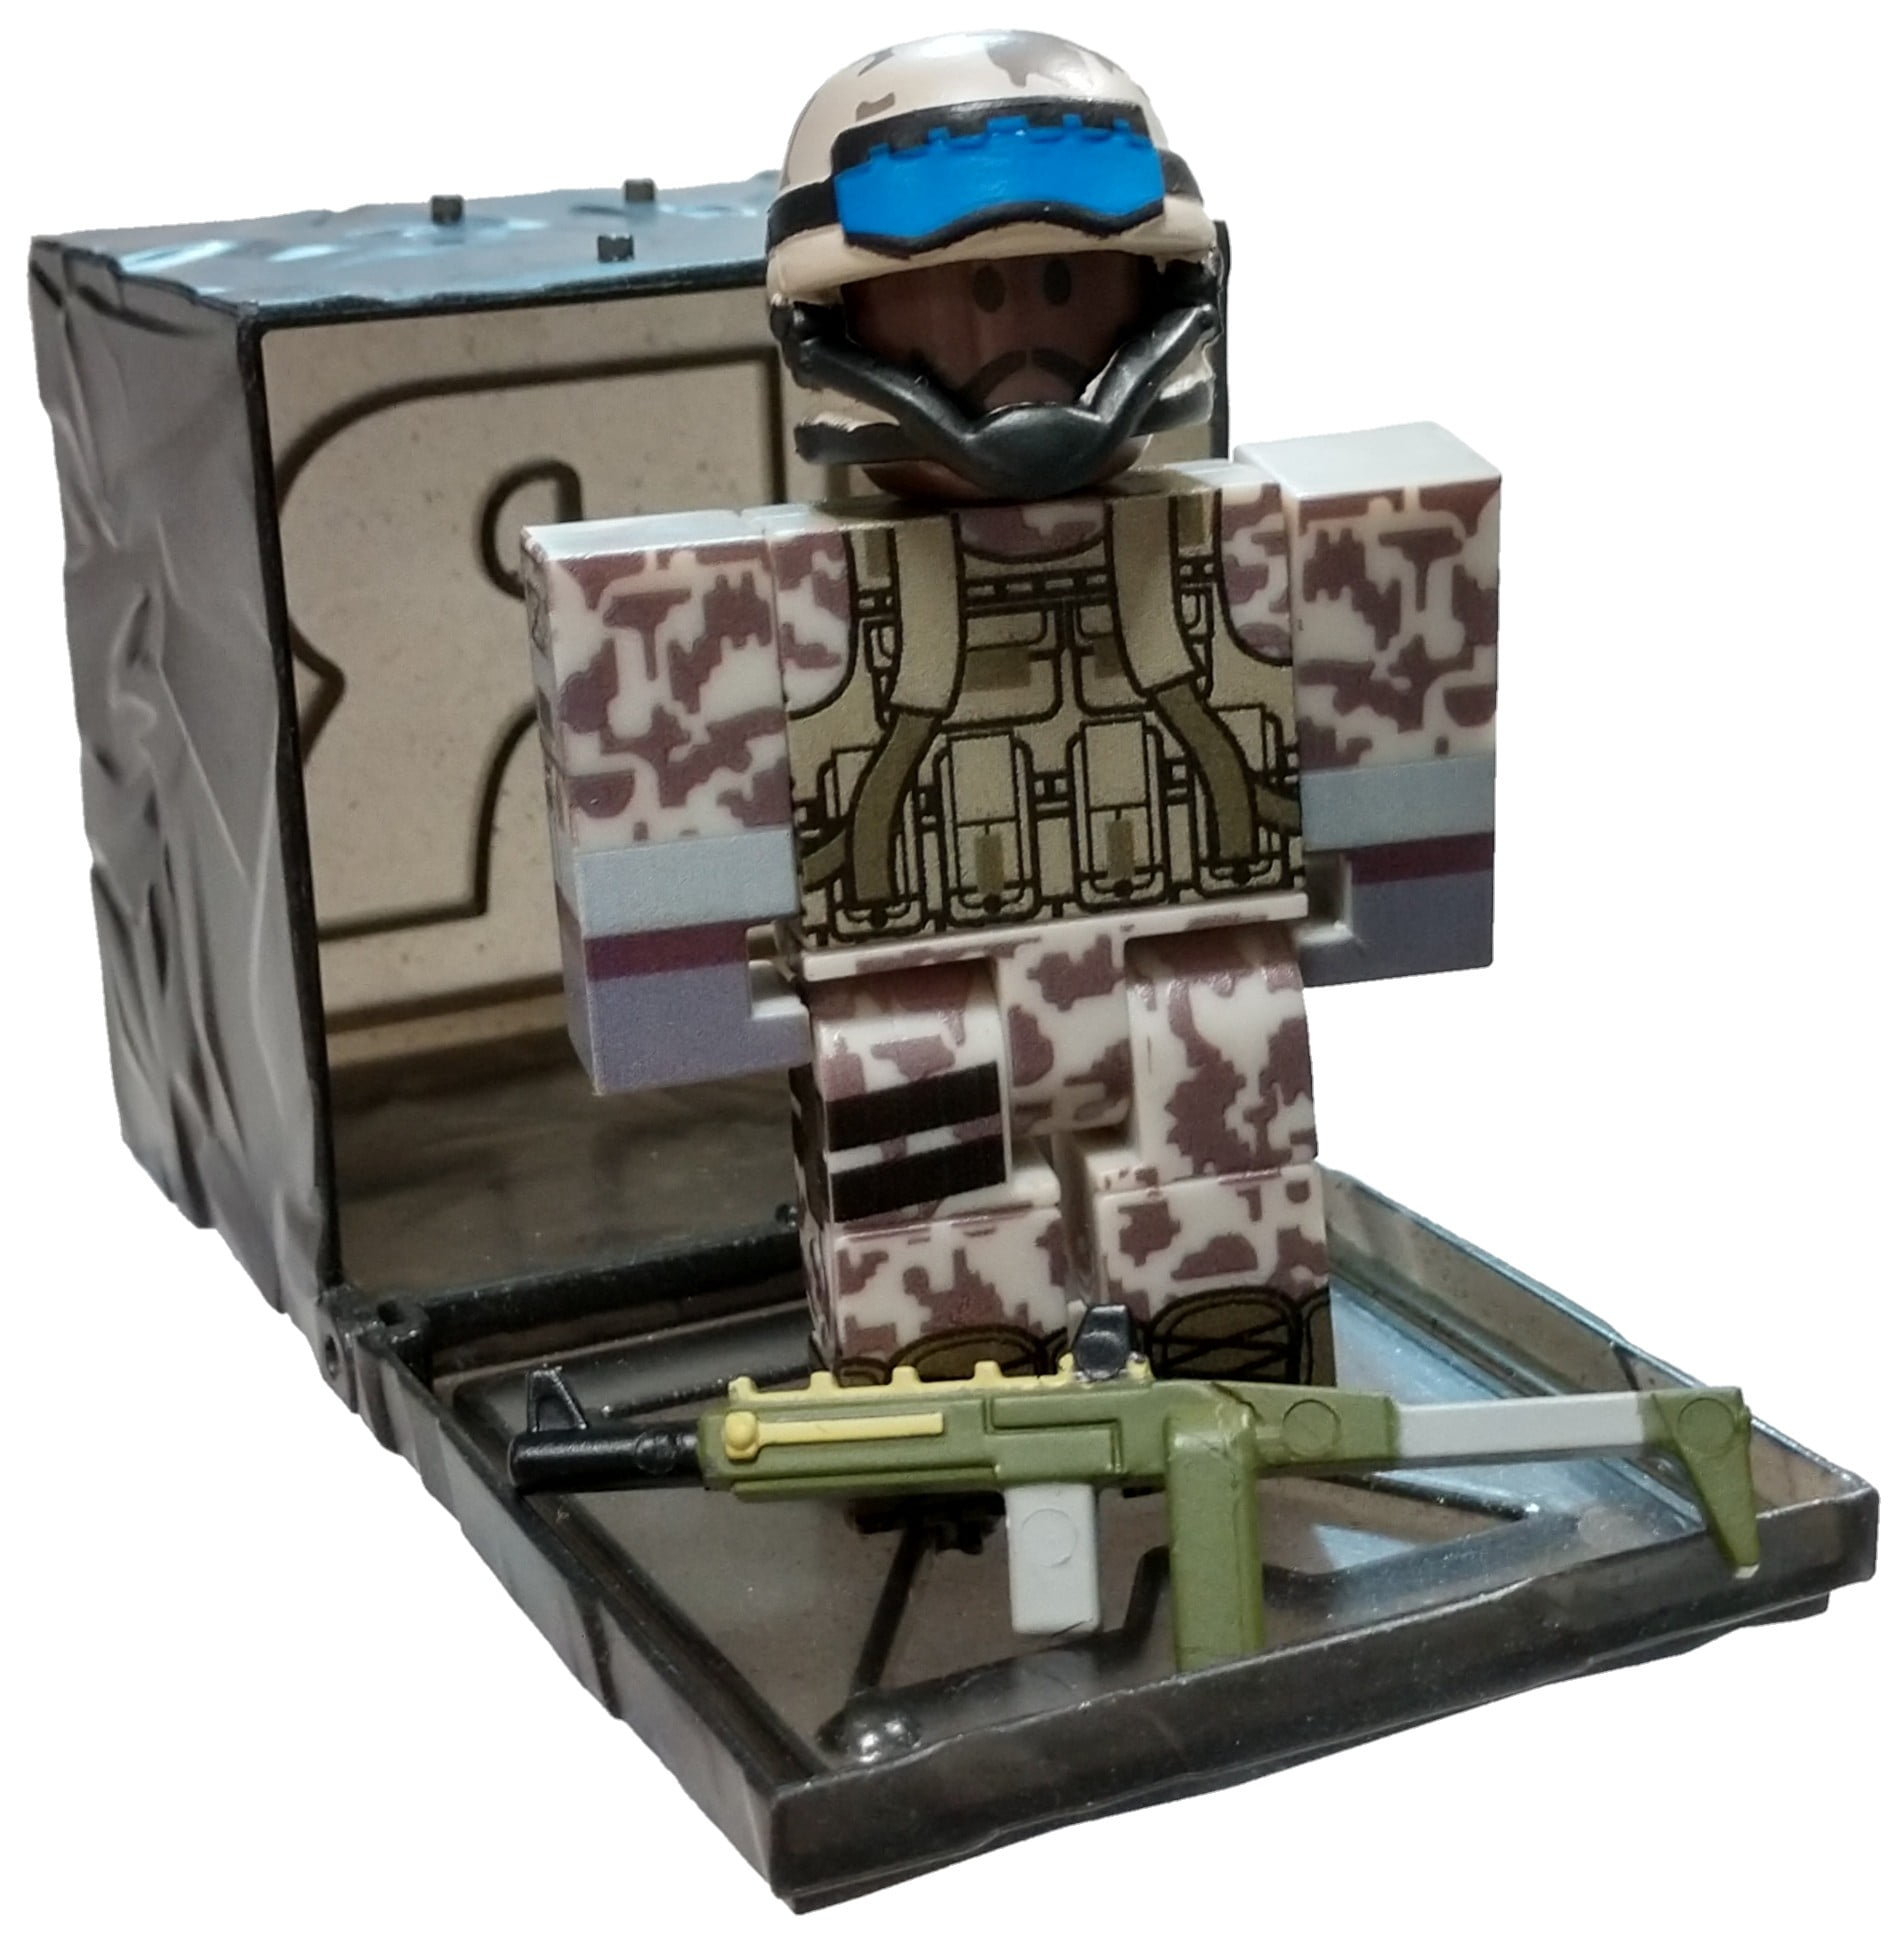 Roblox Series 7 After The Flash Uscpf Soldier Mini Figure With Black Cube And Online Code No Packaging Walmart Com Walmart Com - all roblox toy codes series 7